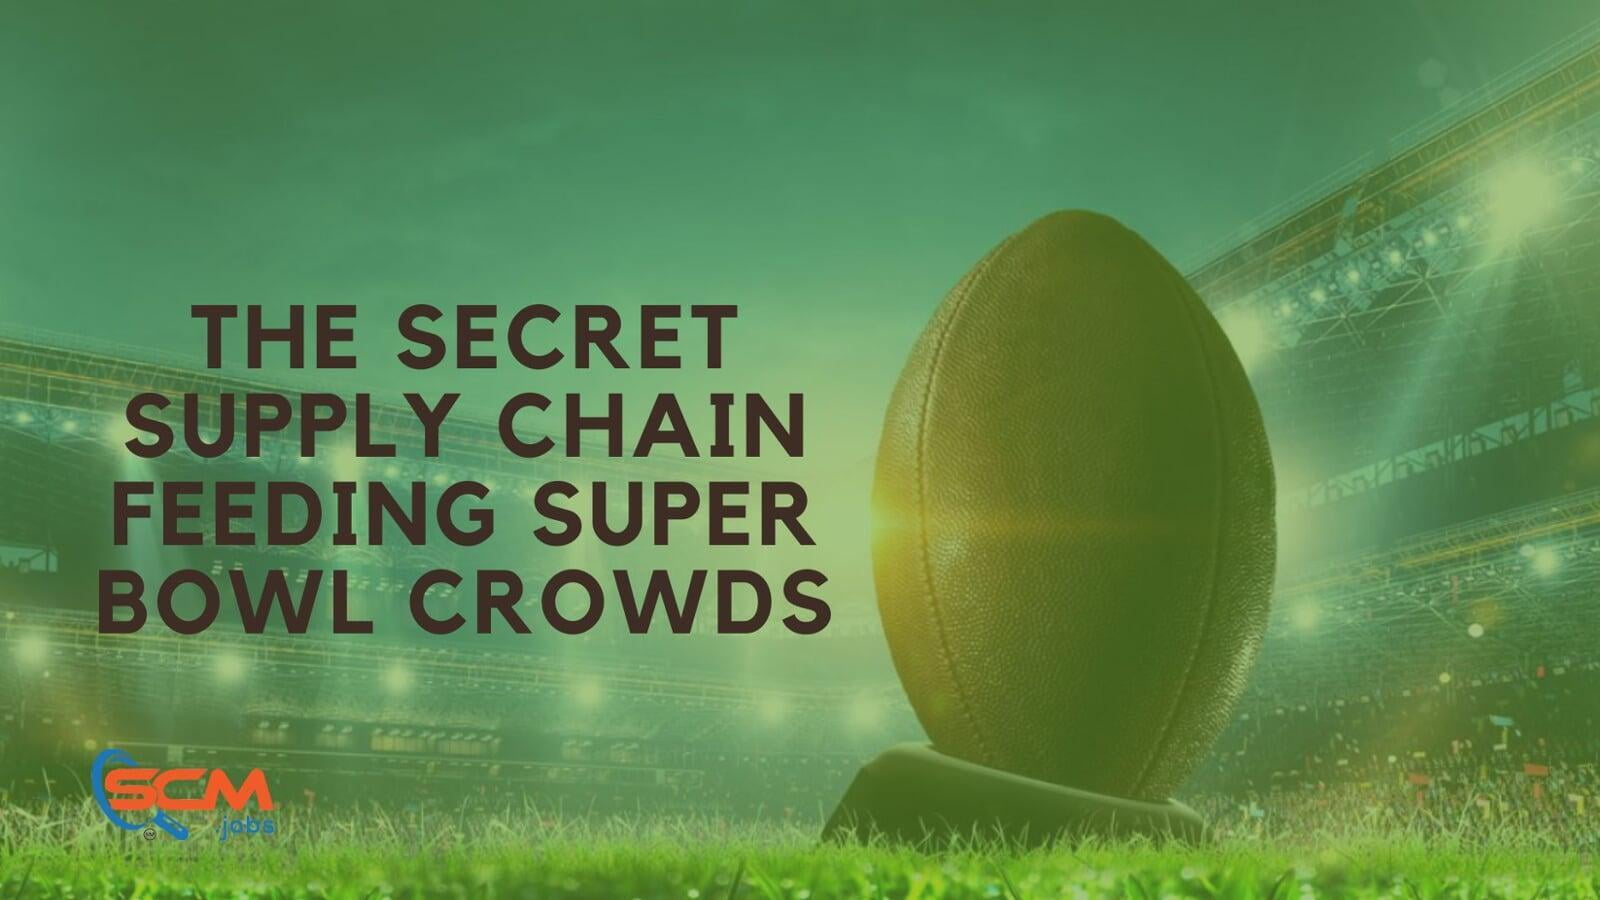 Fueling the Fans: The Secret Supply Chain Feeding Super Bowl Crowds